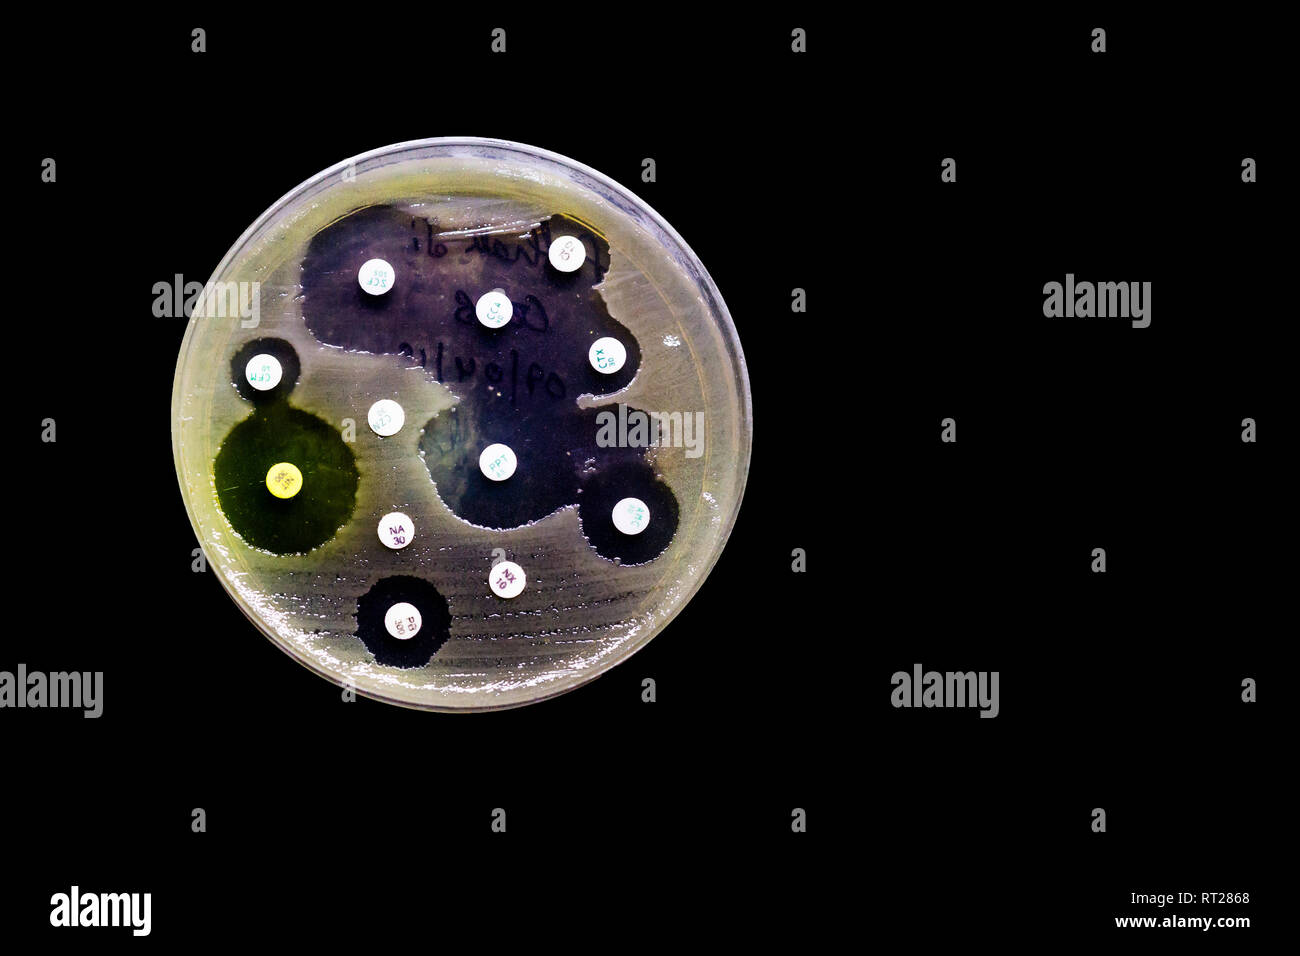 Culture plate of bacterial growth showing antibiotic sensitivity in their colony pattern isolated in black background Stock Photo